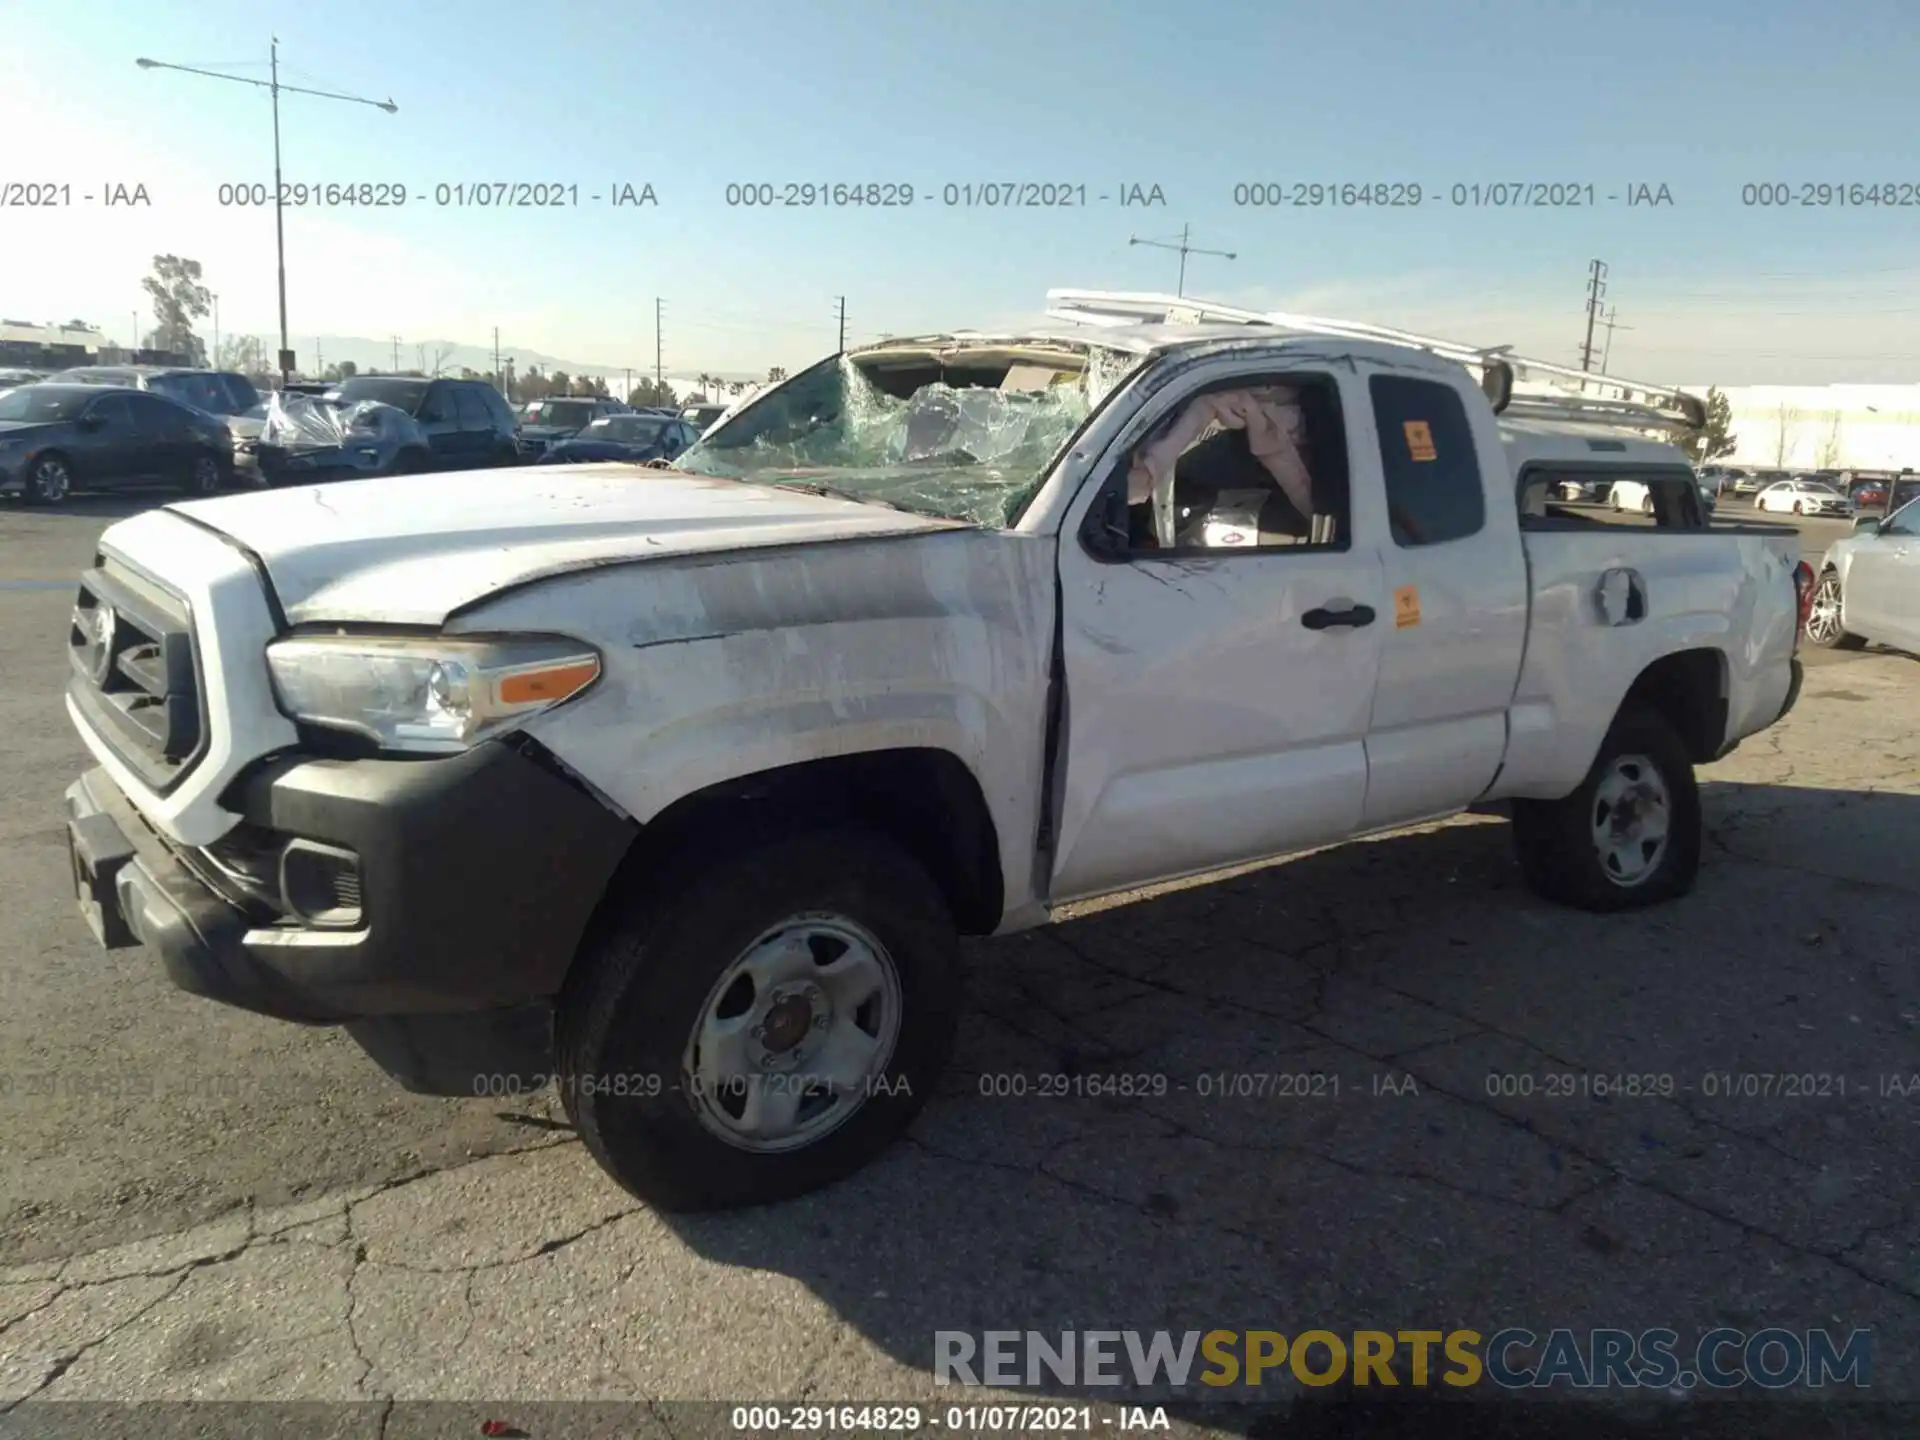 2 Photograph of a damaged car 5TFRX5GN2LX173547 TOYOTA TACOMA 2WD 2020